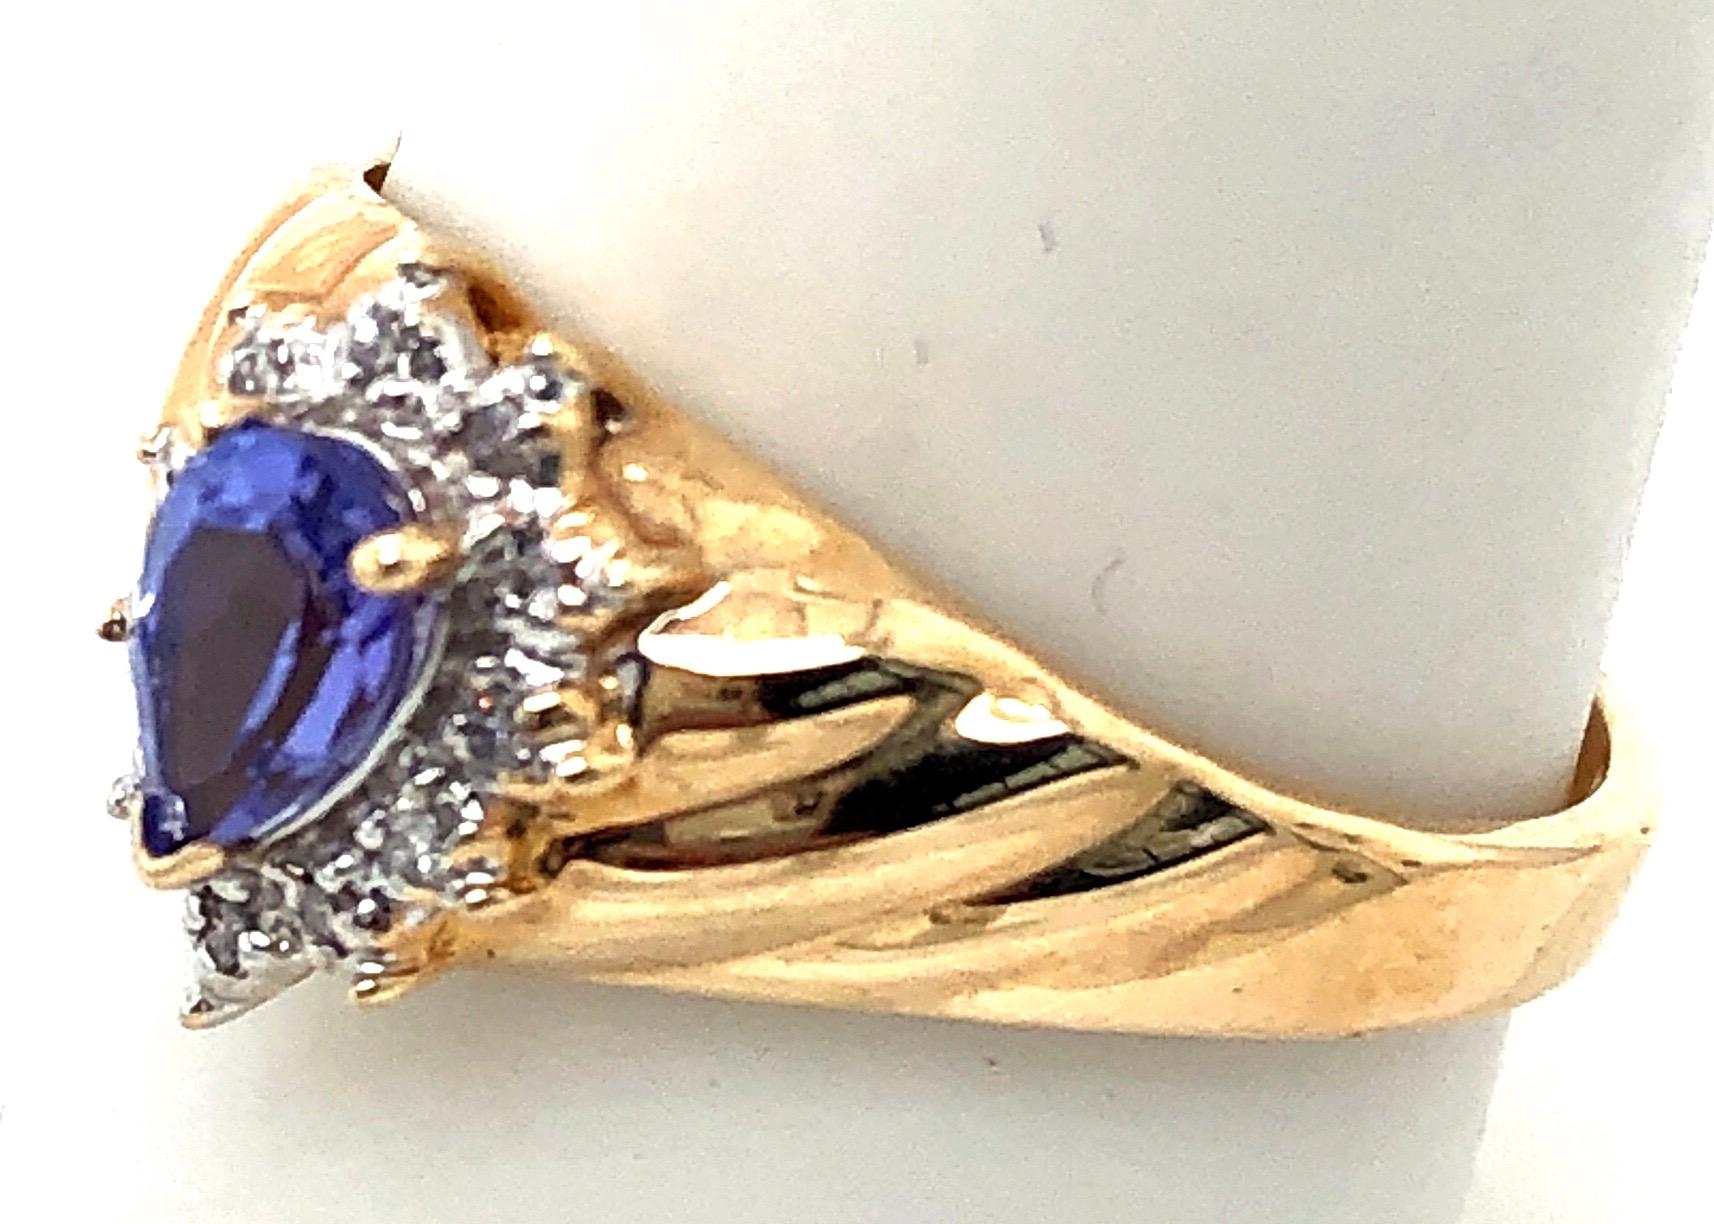 14 Karat Yellow and White Gold Ring Sapphire Solitaire With Diamond Accents 
Size 8.75 .
0.10 total diamond weight.
Pear shaped sapphire
3 grams total weight.